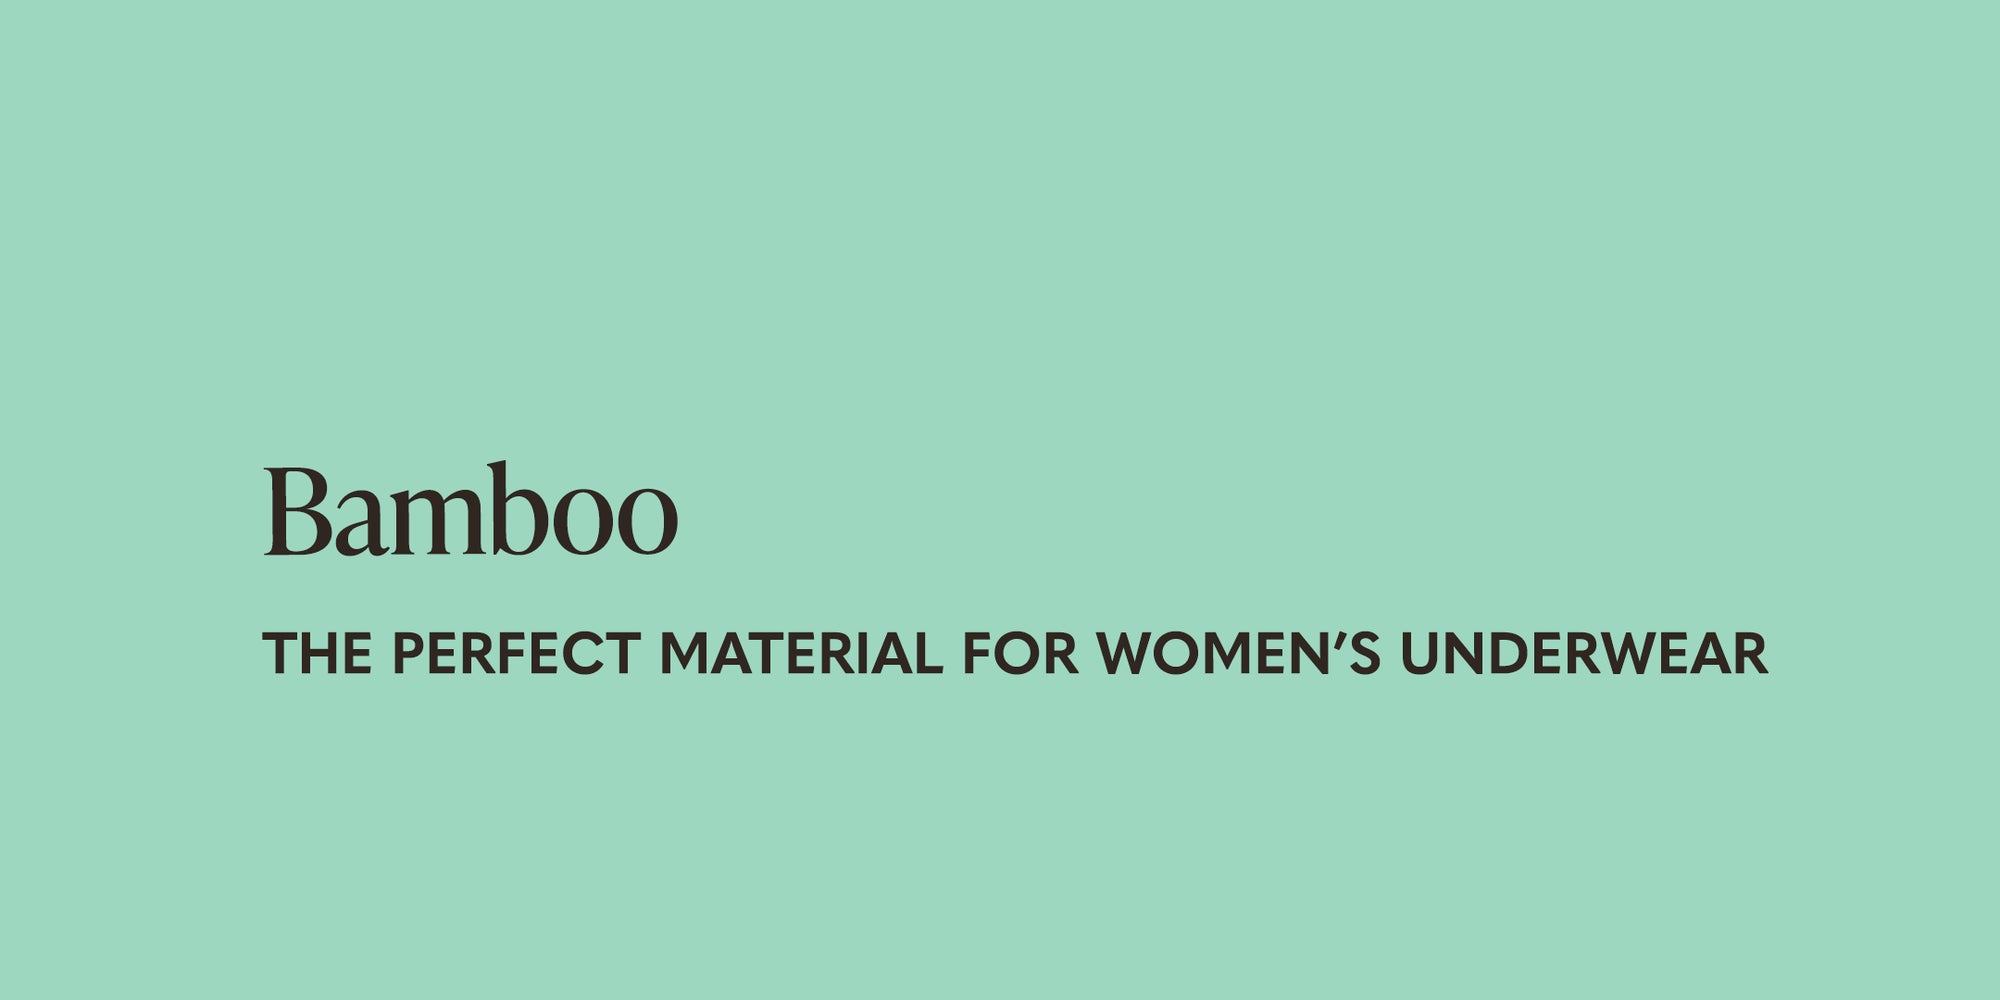 Bamboo: The Perfect Material for Women's Underwear